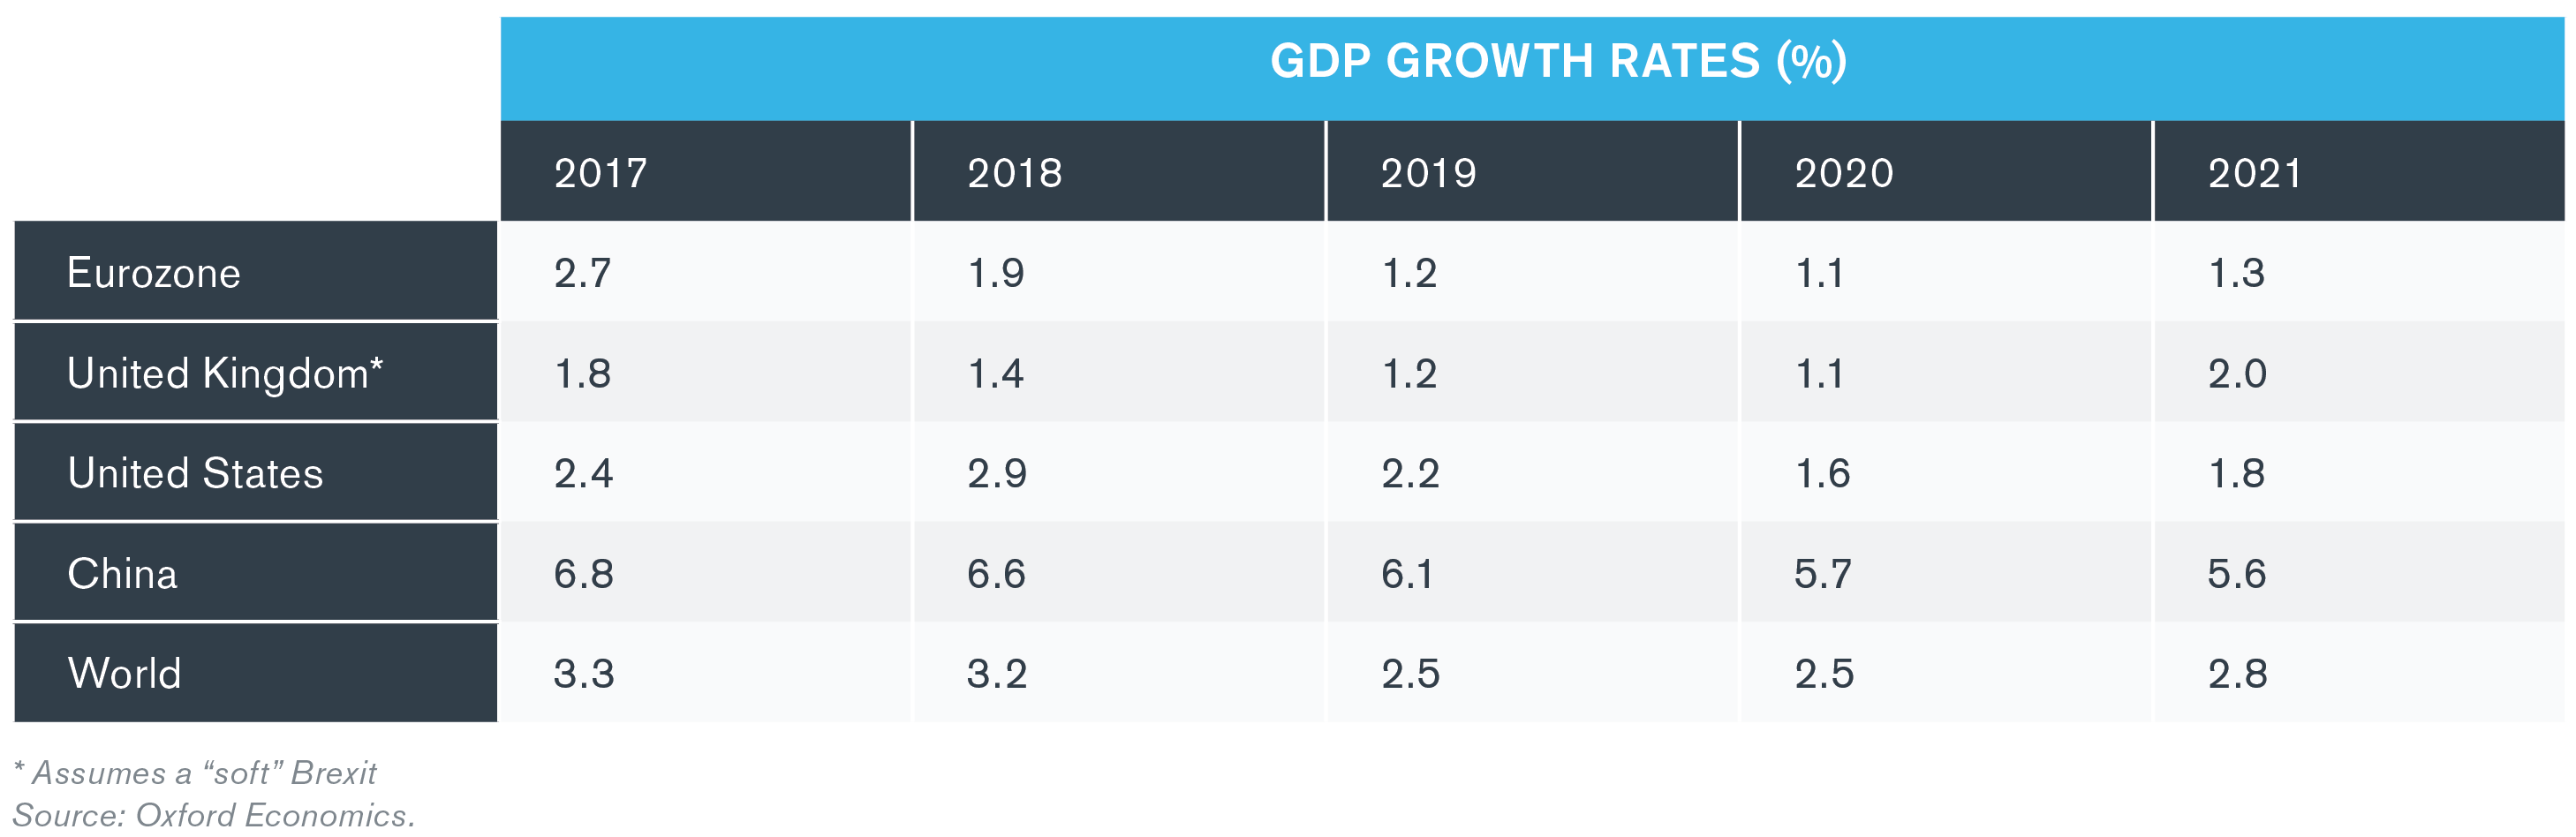 GDP Growth Rates (%)